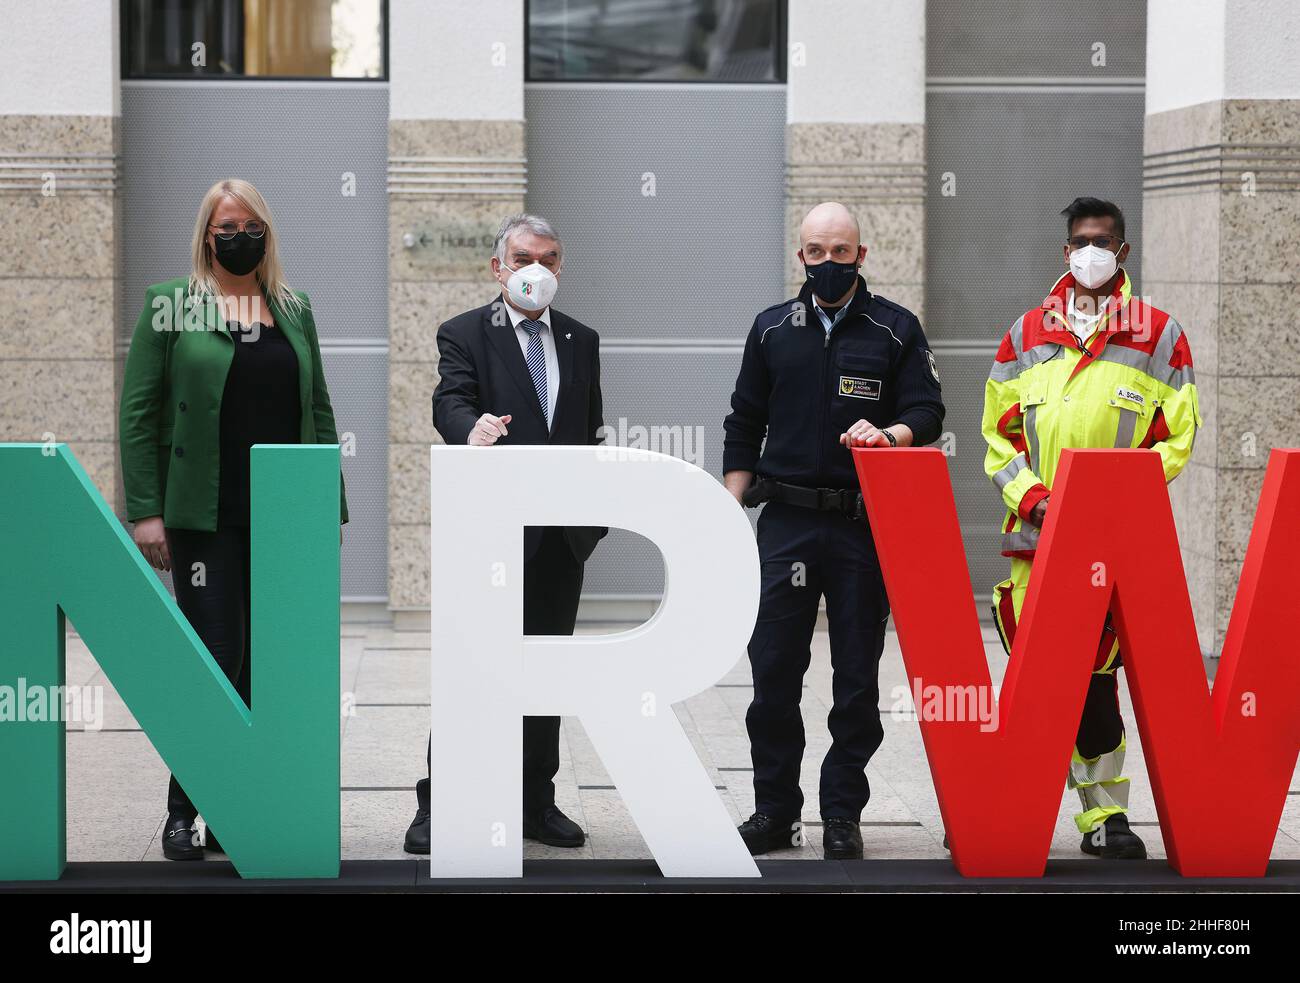 Duesseldorf, Germany. 24th Jan, 2022. Herbert Reul (CDU, 2nd from left), Interior Minister of North Rhine-Westphalia, stands with public service employees Sven Nütten (2nd from right), Adrian Scherf (r) and Nicole Schorn at a logo of the state of North Rhine-Westphalia. The Minister of the Interior of North Rhine-Westphalia has presented the state-wide prevention network '#sicher im Dienst'. The new network is designed to protect public service employees from threats and violence. Credit: Oliver Berg/dpa/Alamy Live News Stock Photo